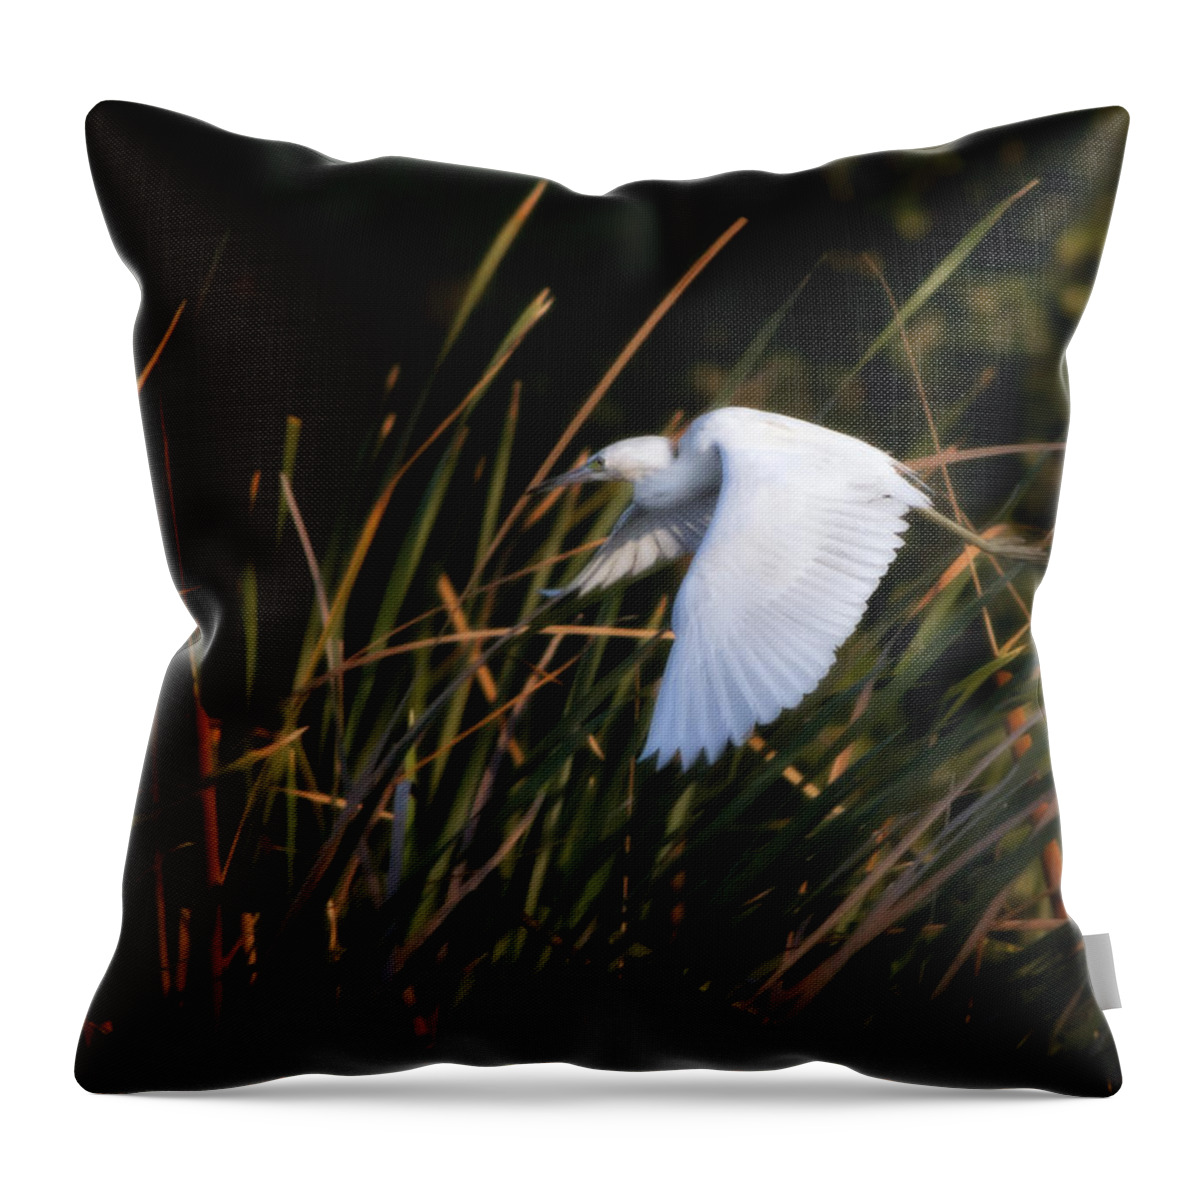 Little Blue Heron Throw Pillow featuring the photograph Little Blue Heron Before The Change To Blue by Steven Sparks